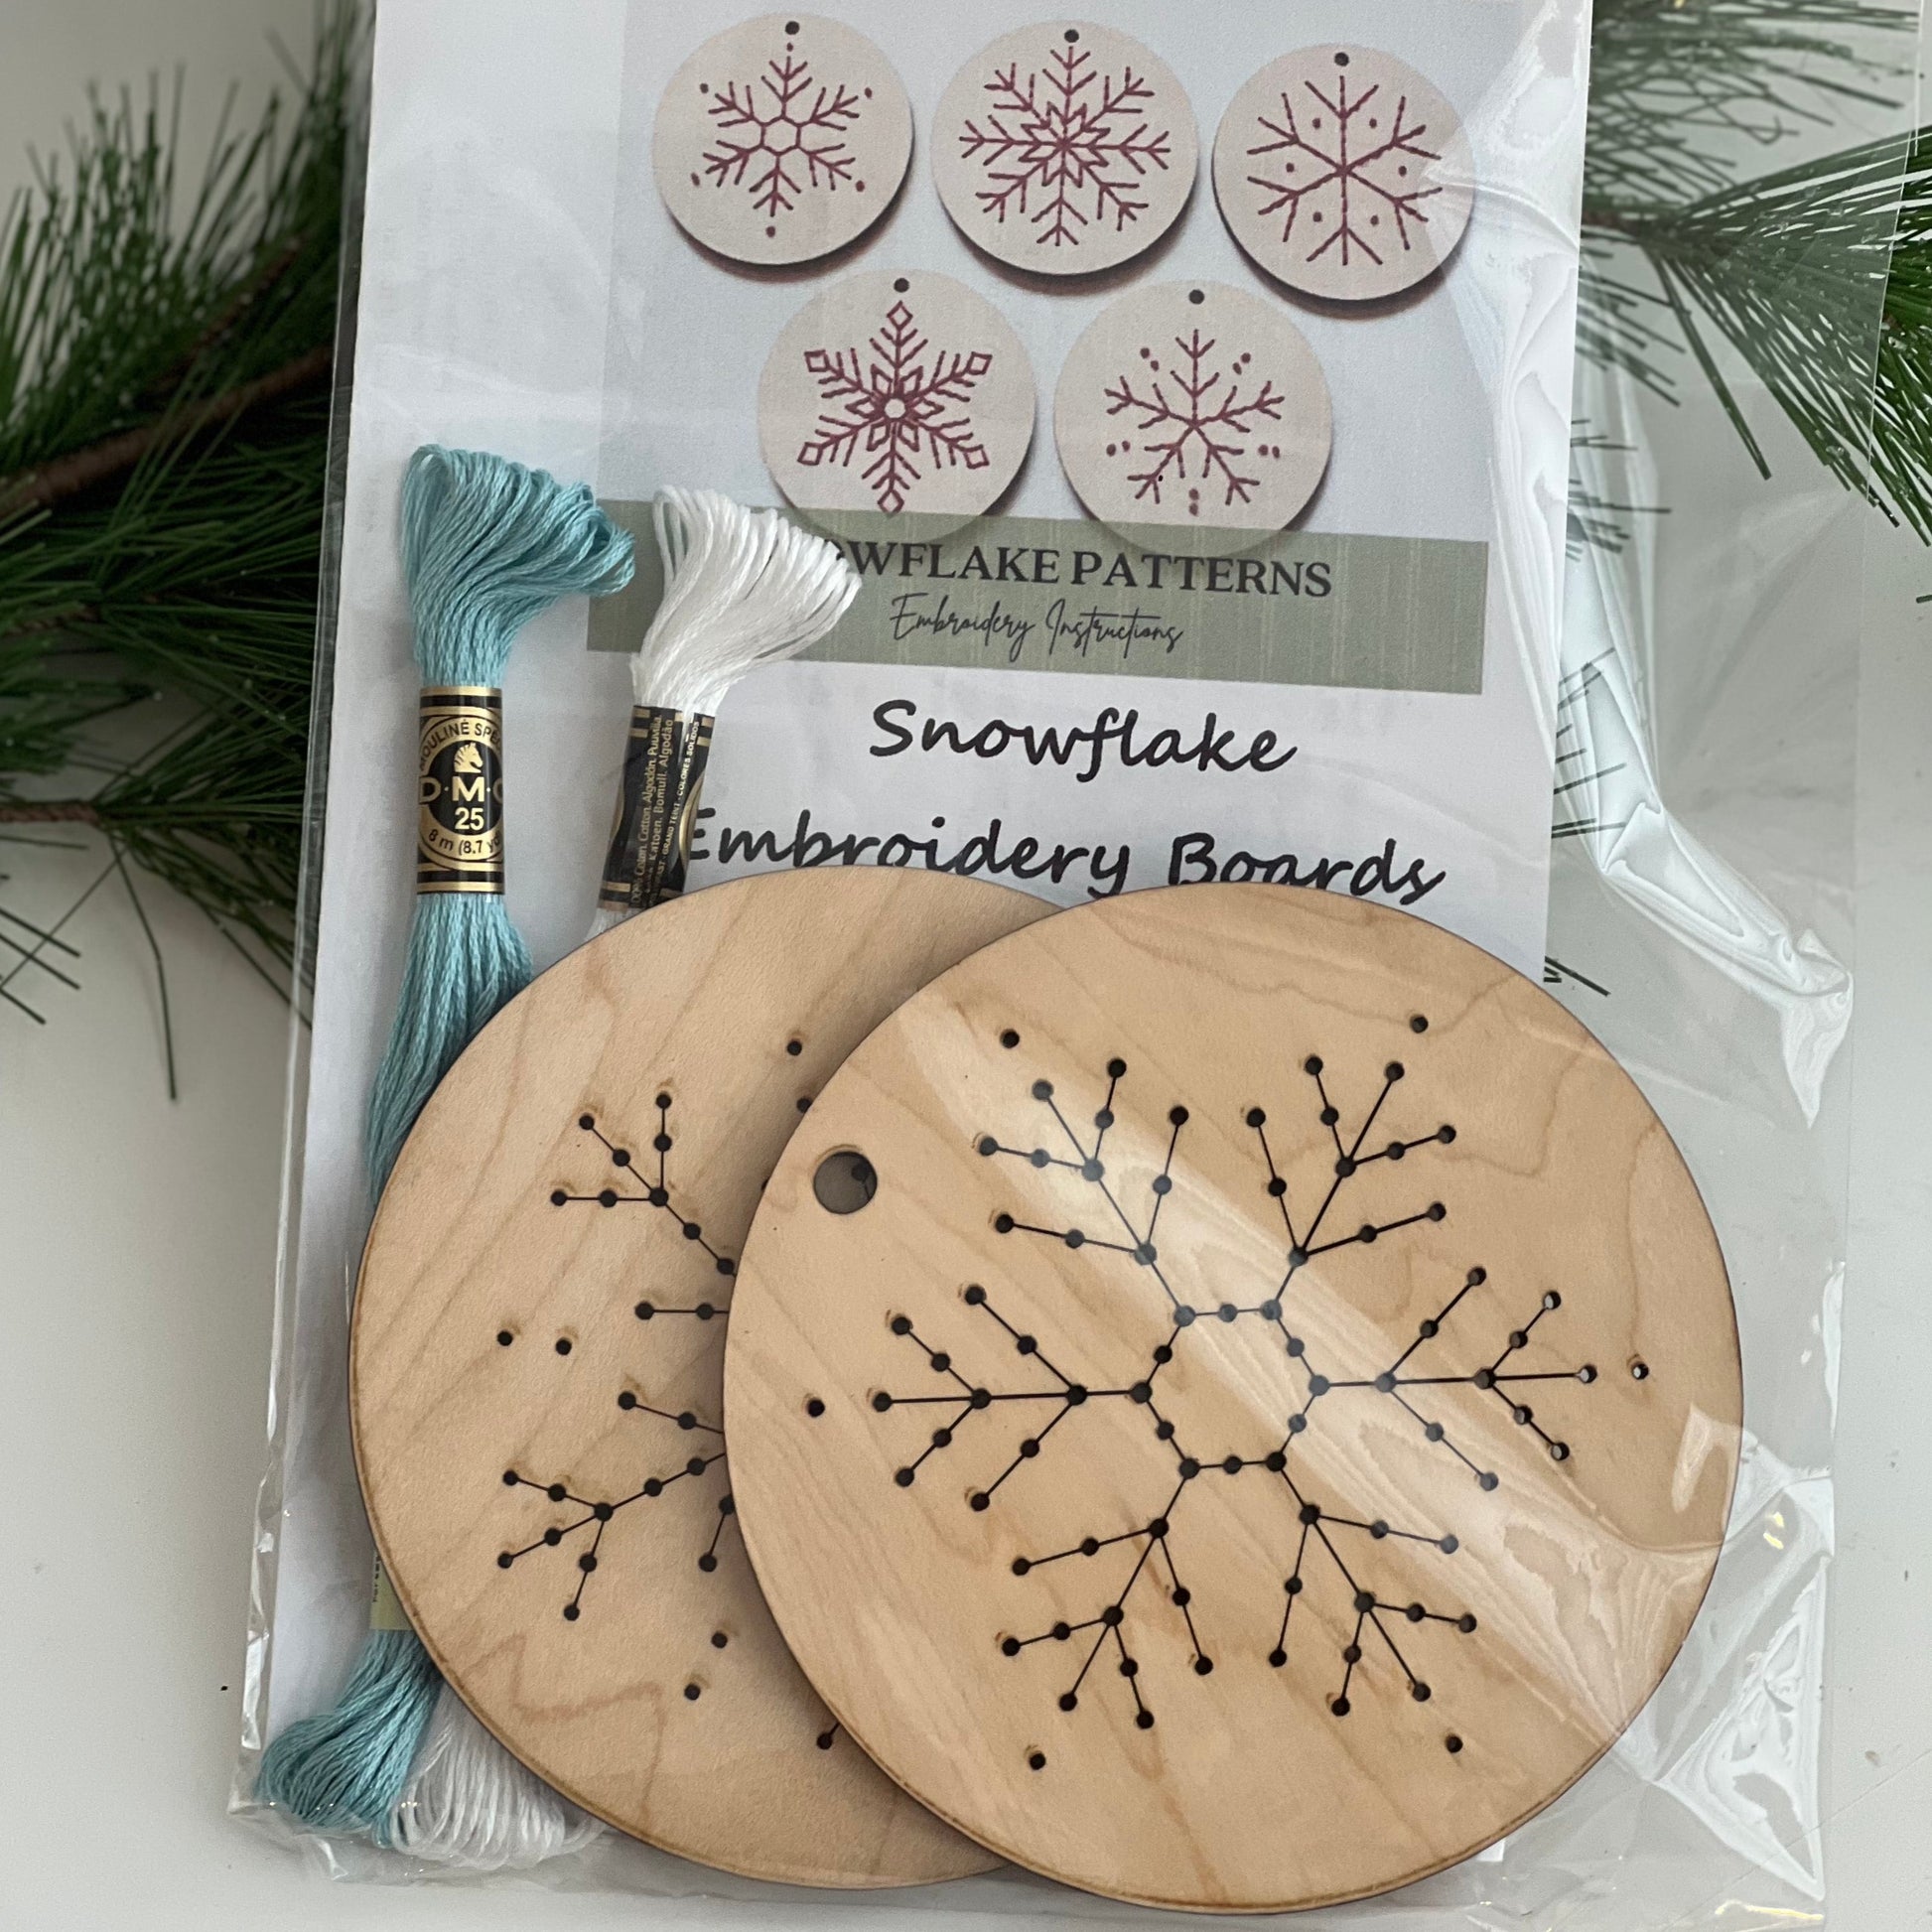 snowflake-embroidery-boards